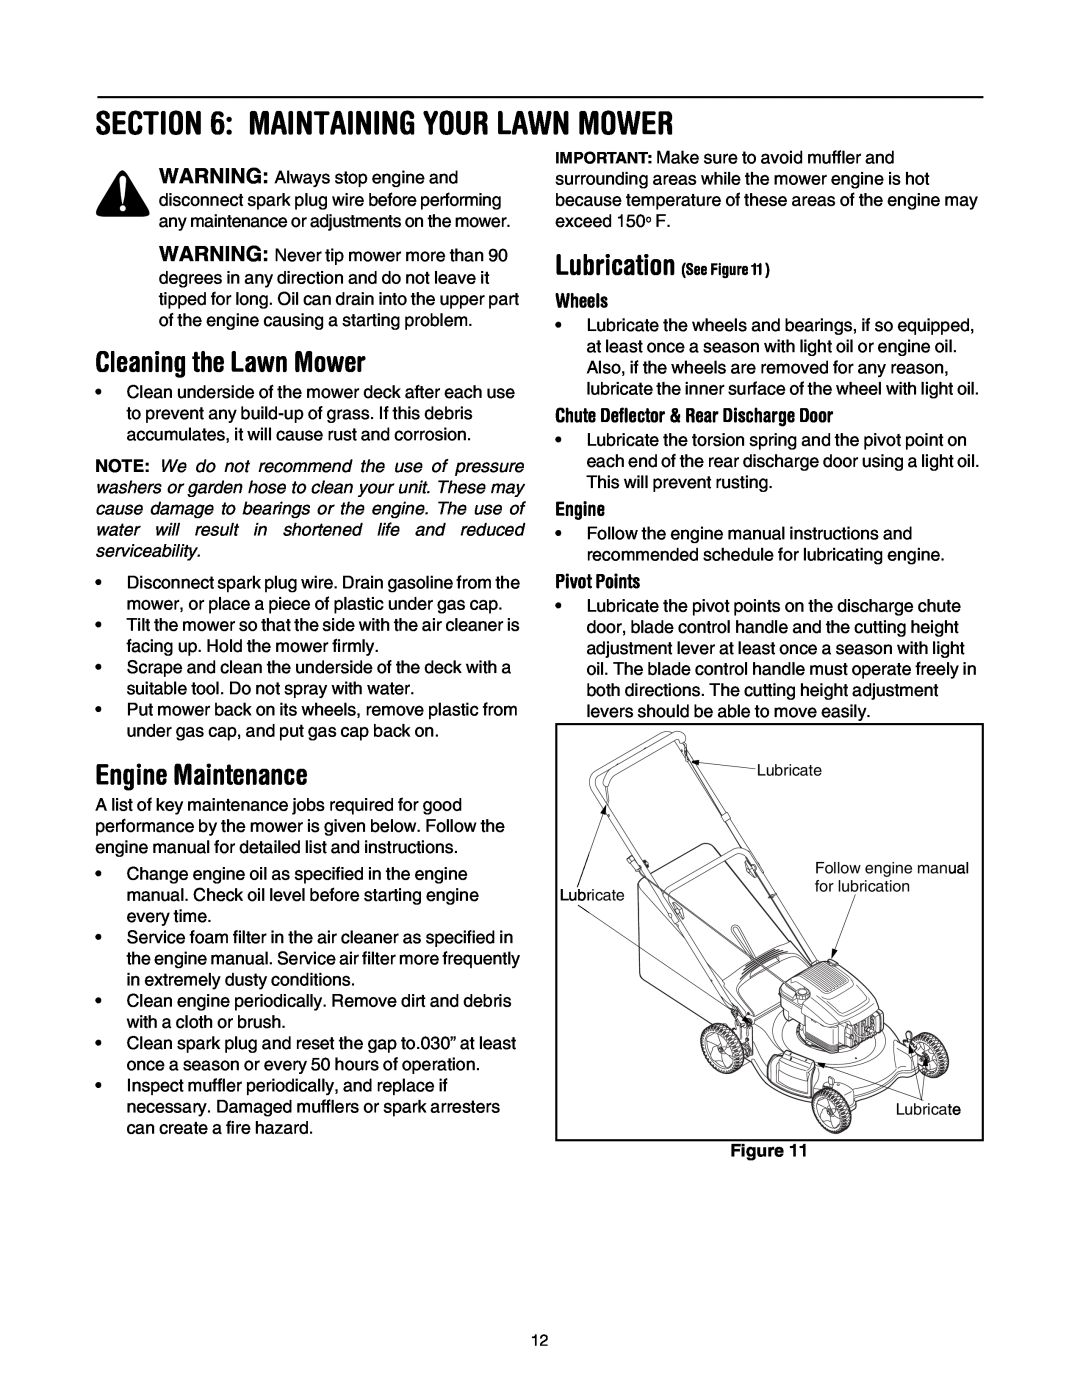 White Outdoor 430 manual Maintaining Your Lawn Mower, Cleaning the Lawn Mower, Engine Maintenance, Wheels, Pivot Points 